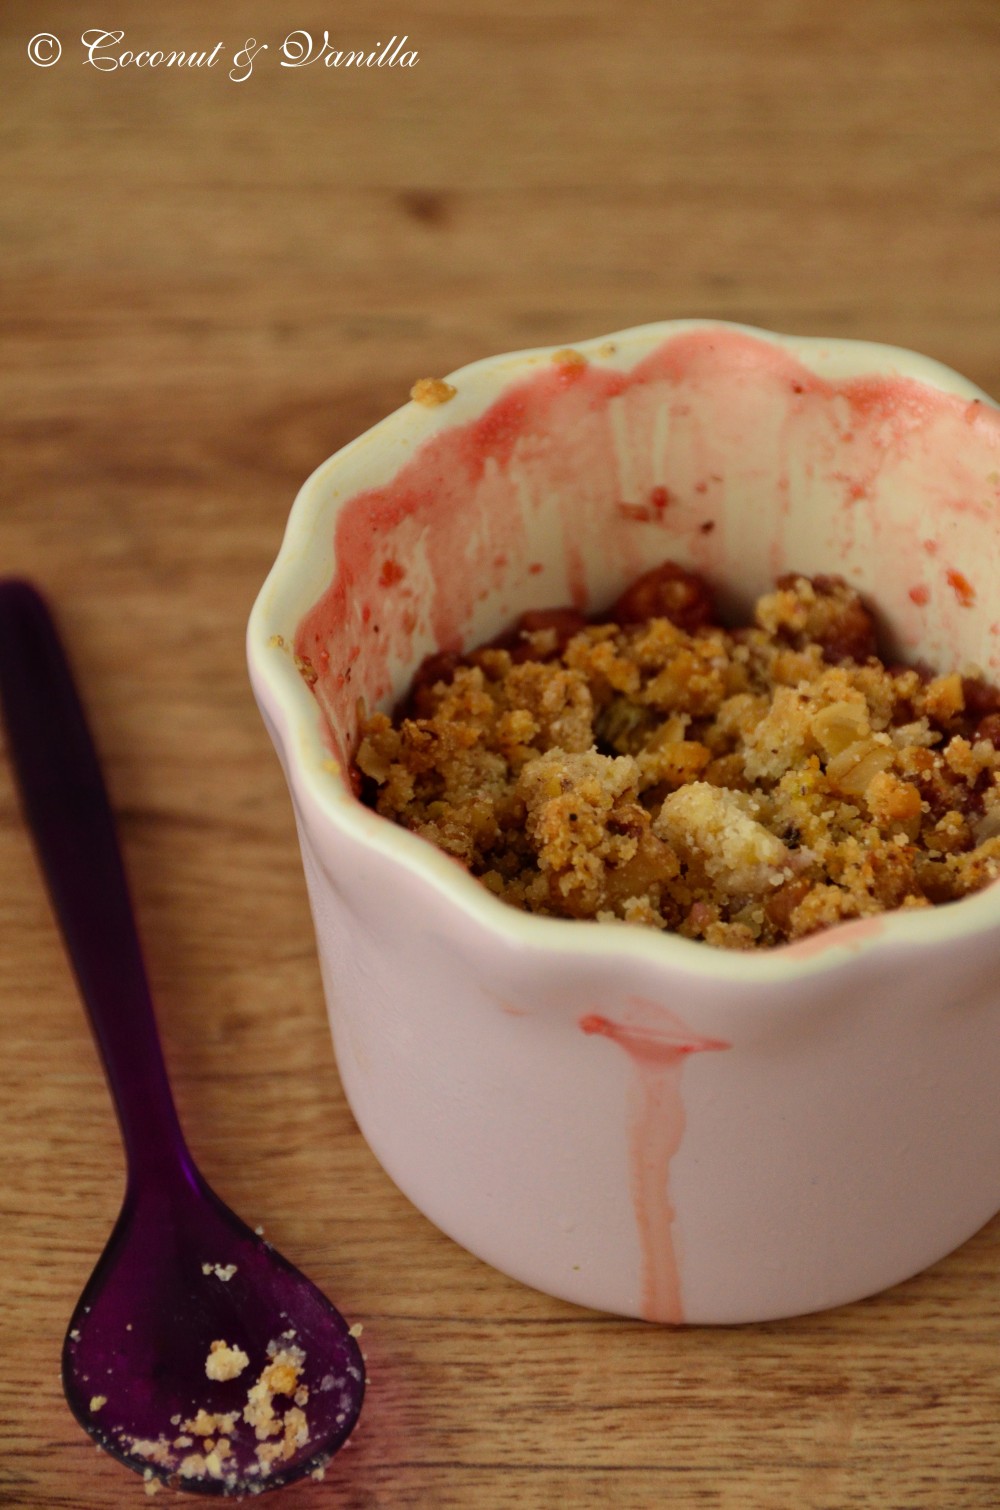 Apple, rhubarb and strawberry nutty crumble